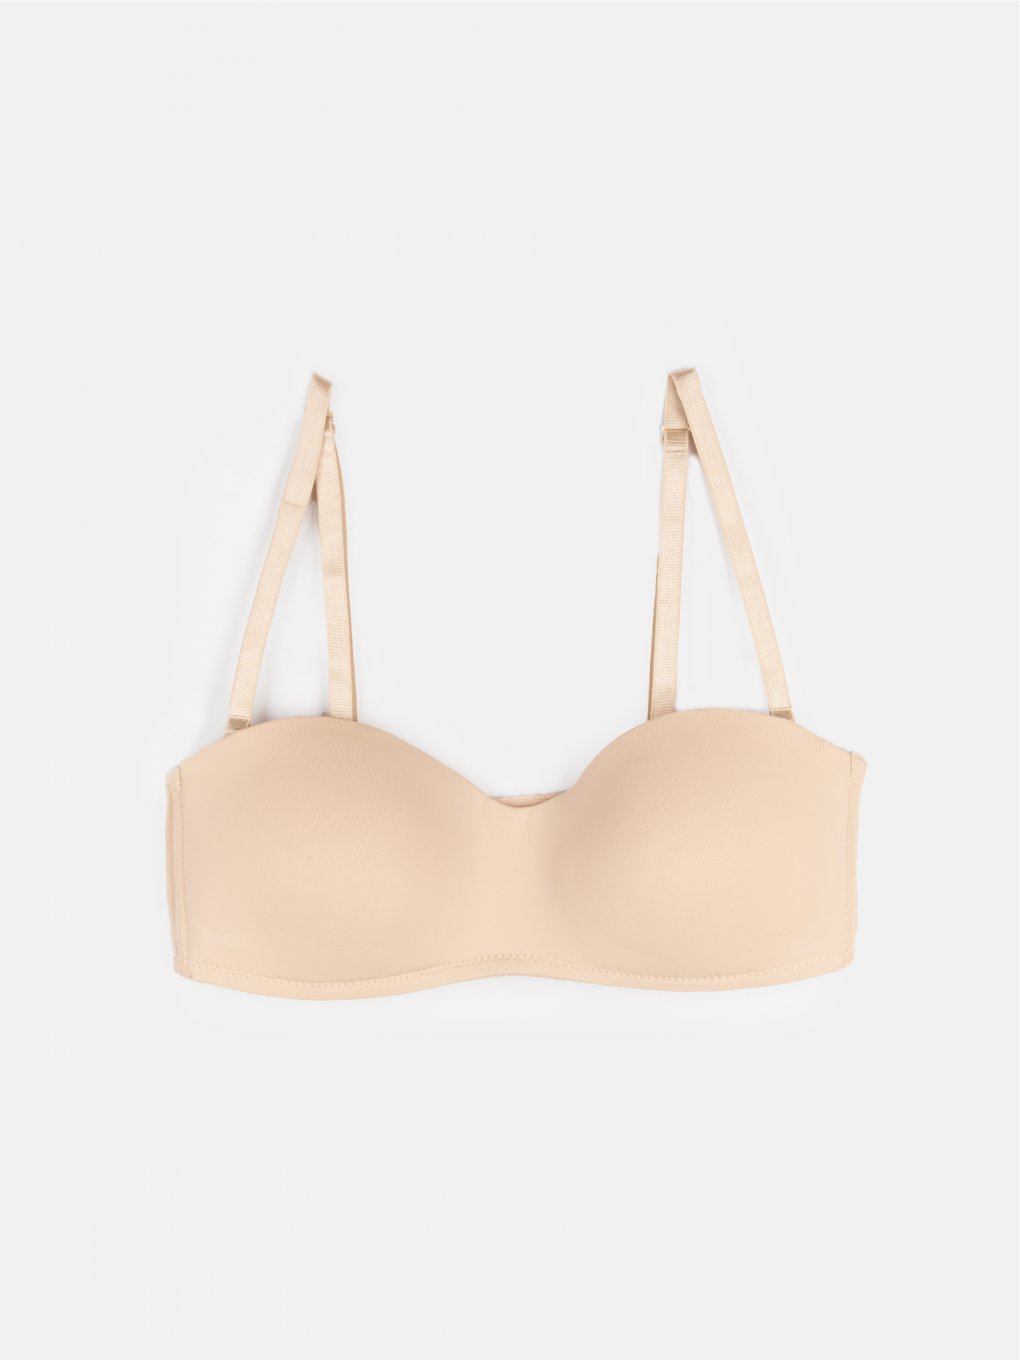 Padded bra with removable straps